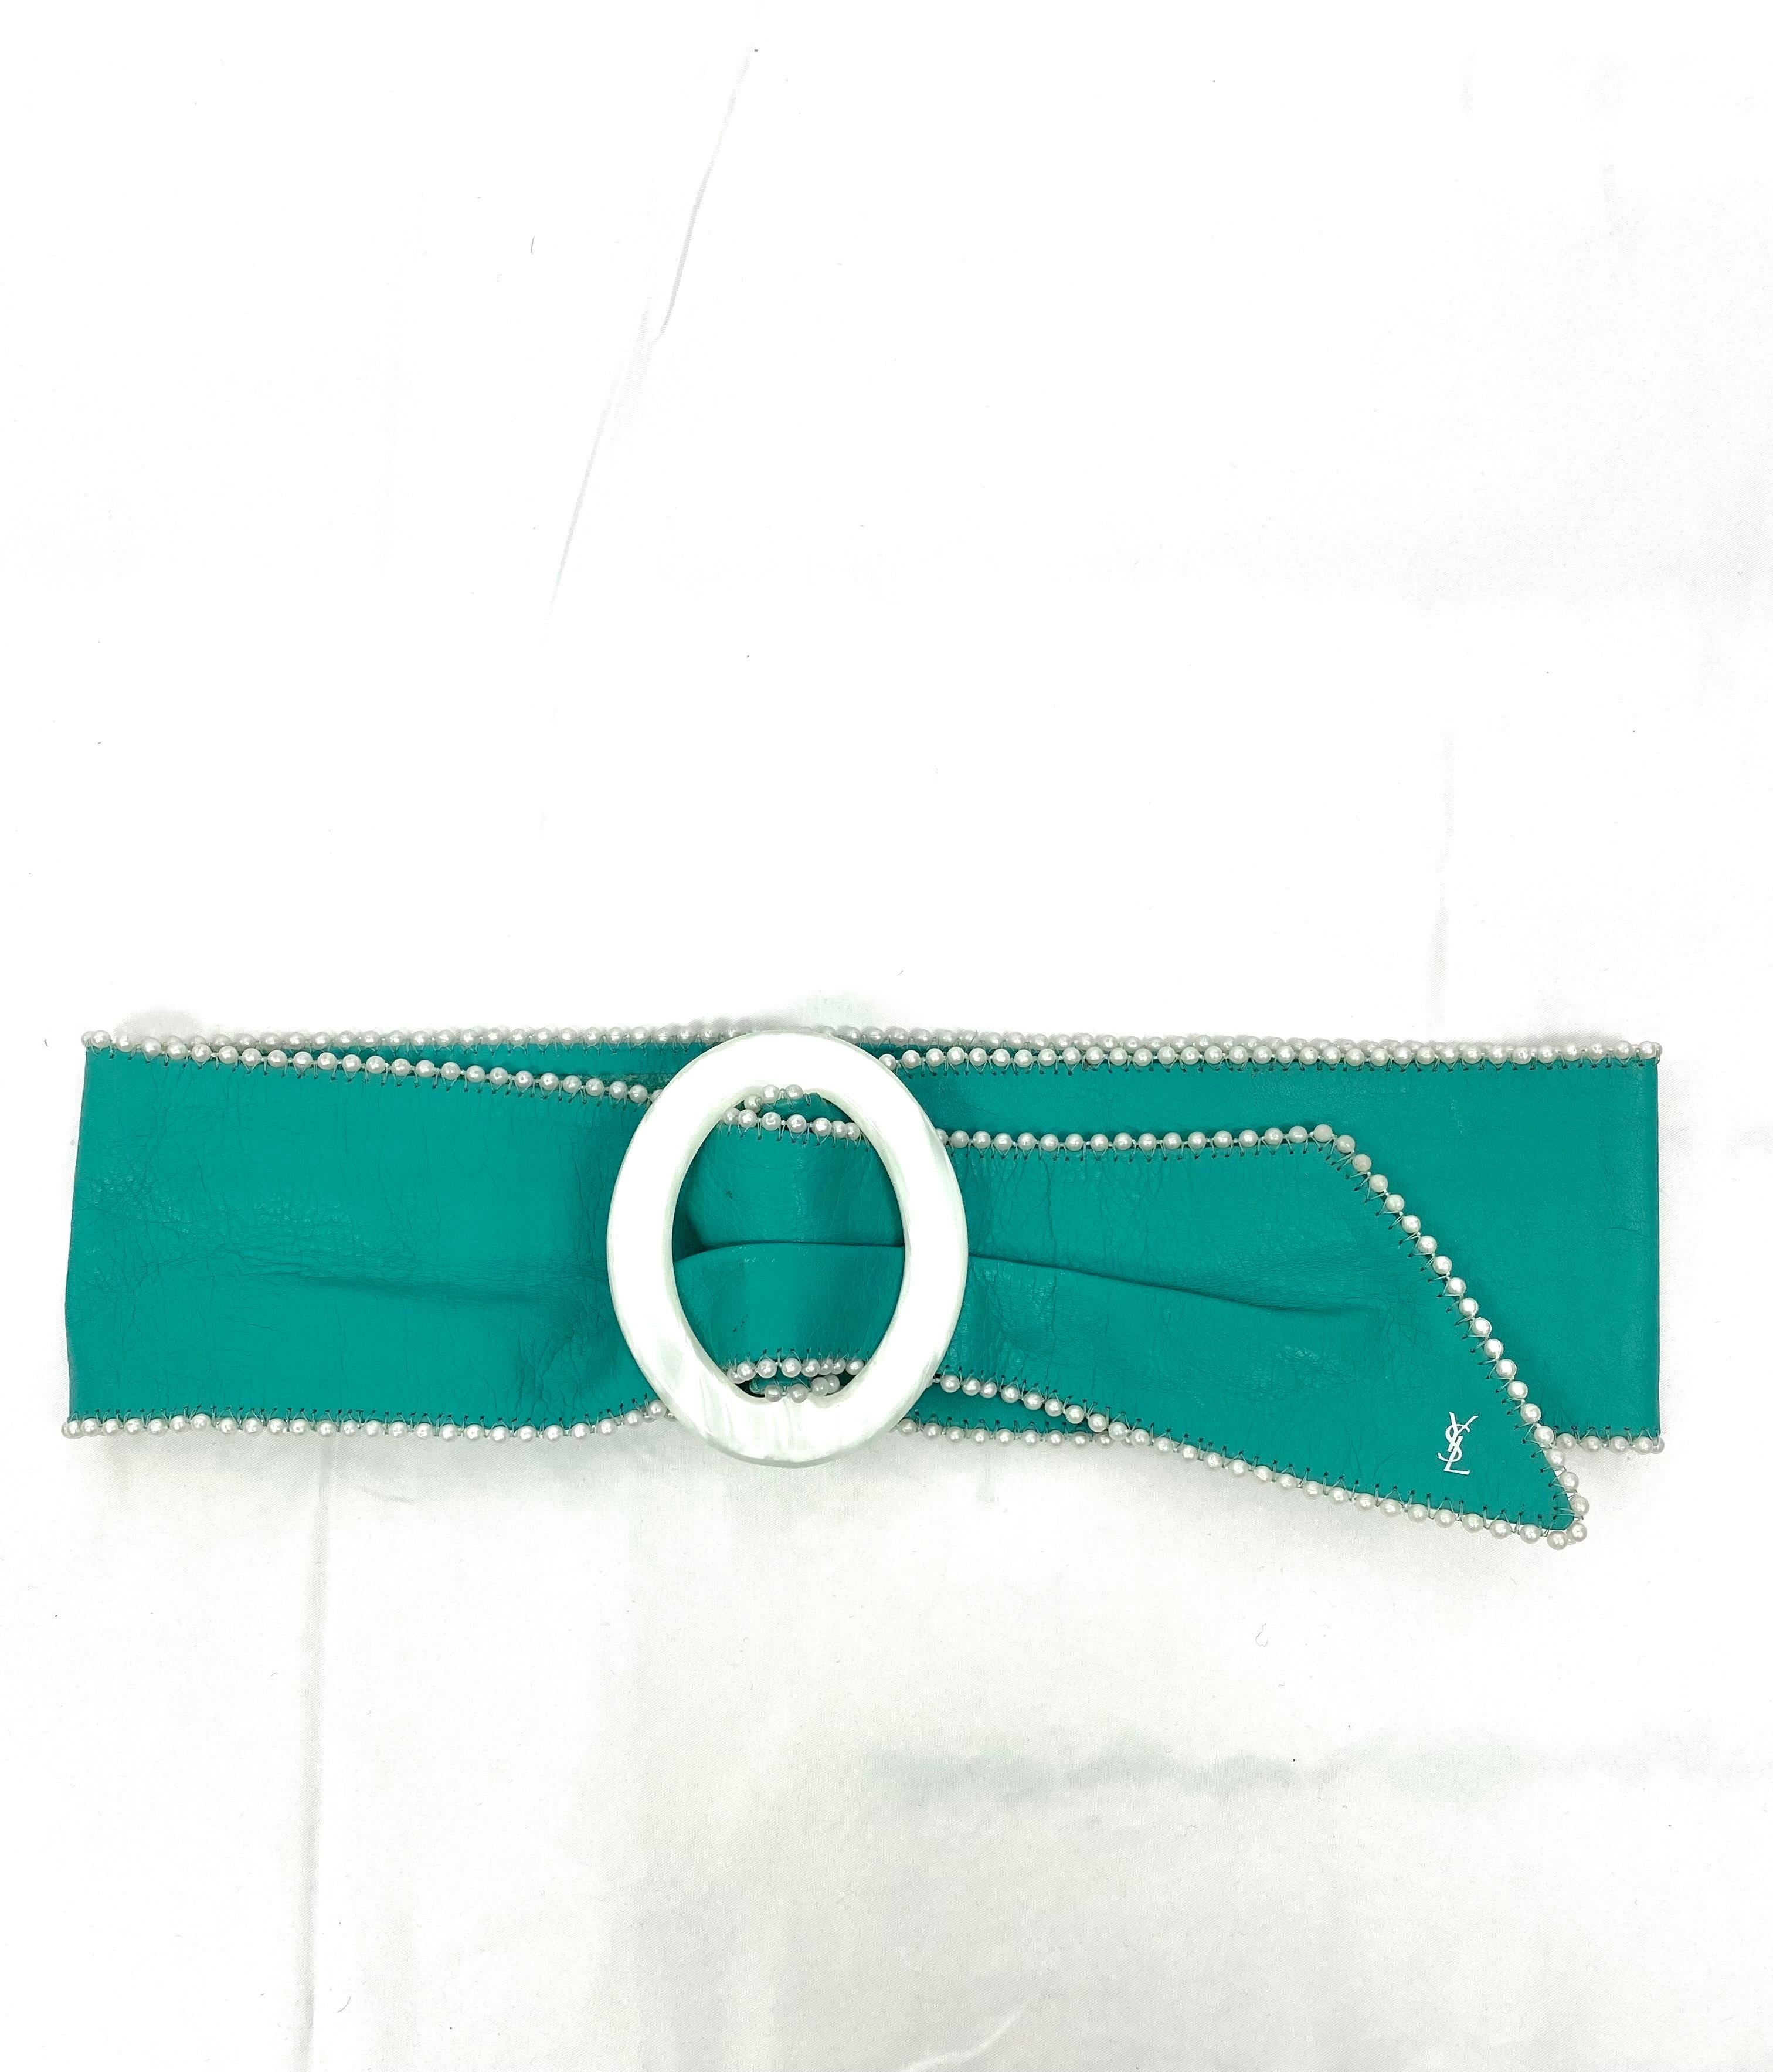 Vintage Yves Saint Laurent belt in turquoise leather, adorned with small white pearls, pretty and imposing pearly buckle (9cm x 7.5cm)
Small YSL logo at the end of the belt.
Size 70/28 adaptable
Total length 85cm
Width 8.5cm

some slight traces of